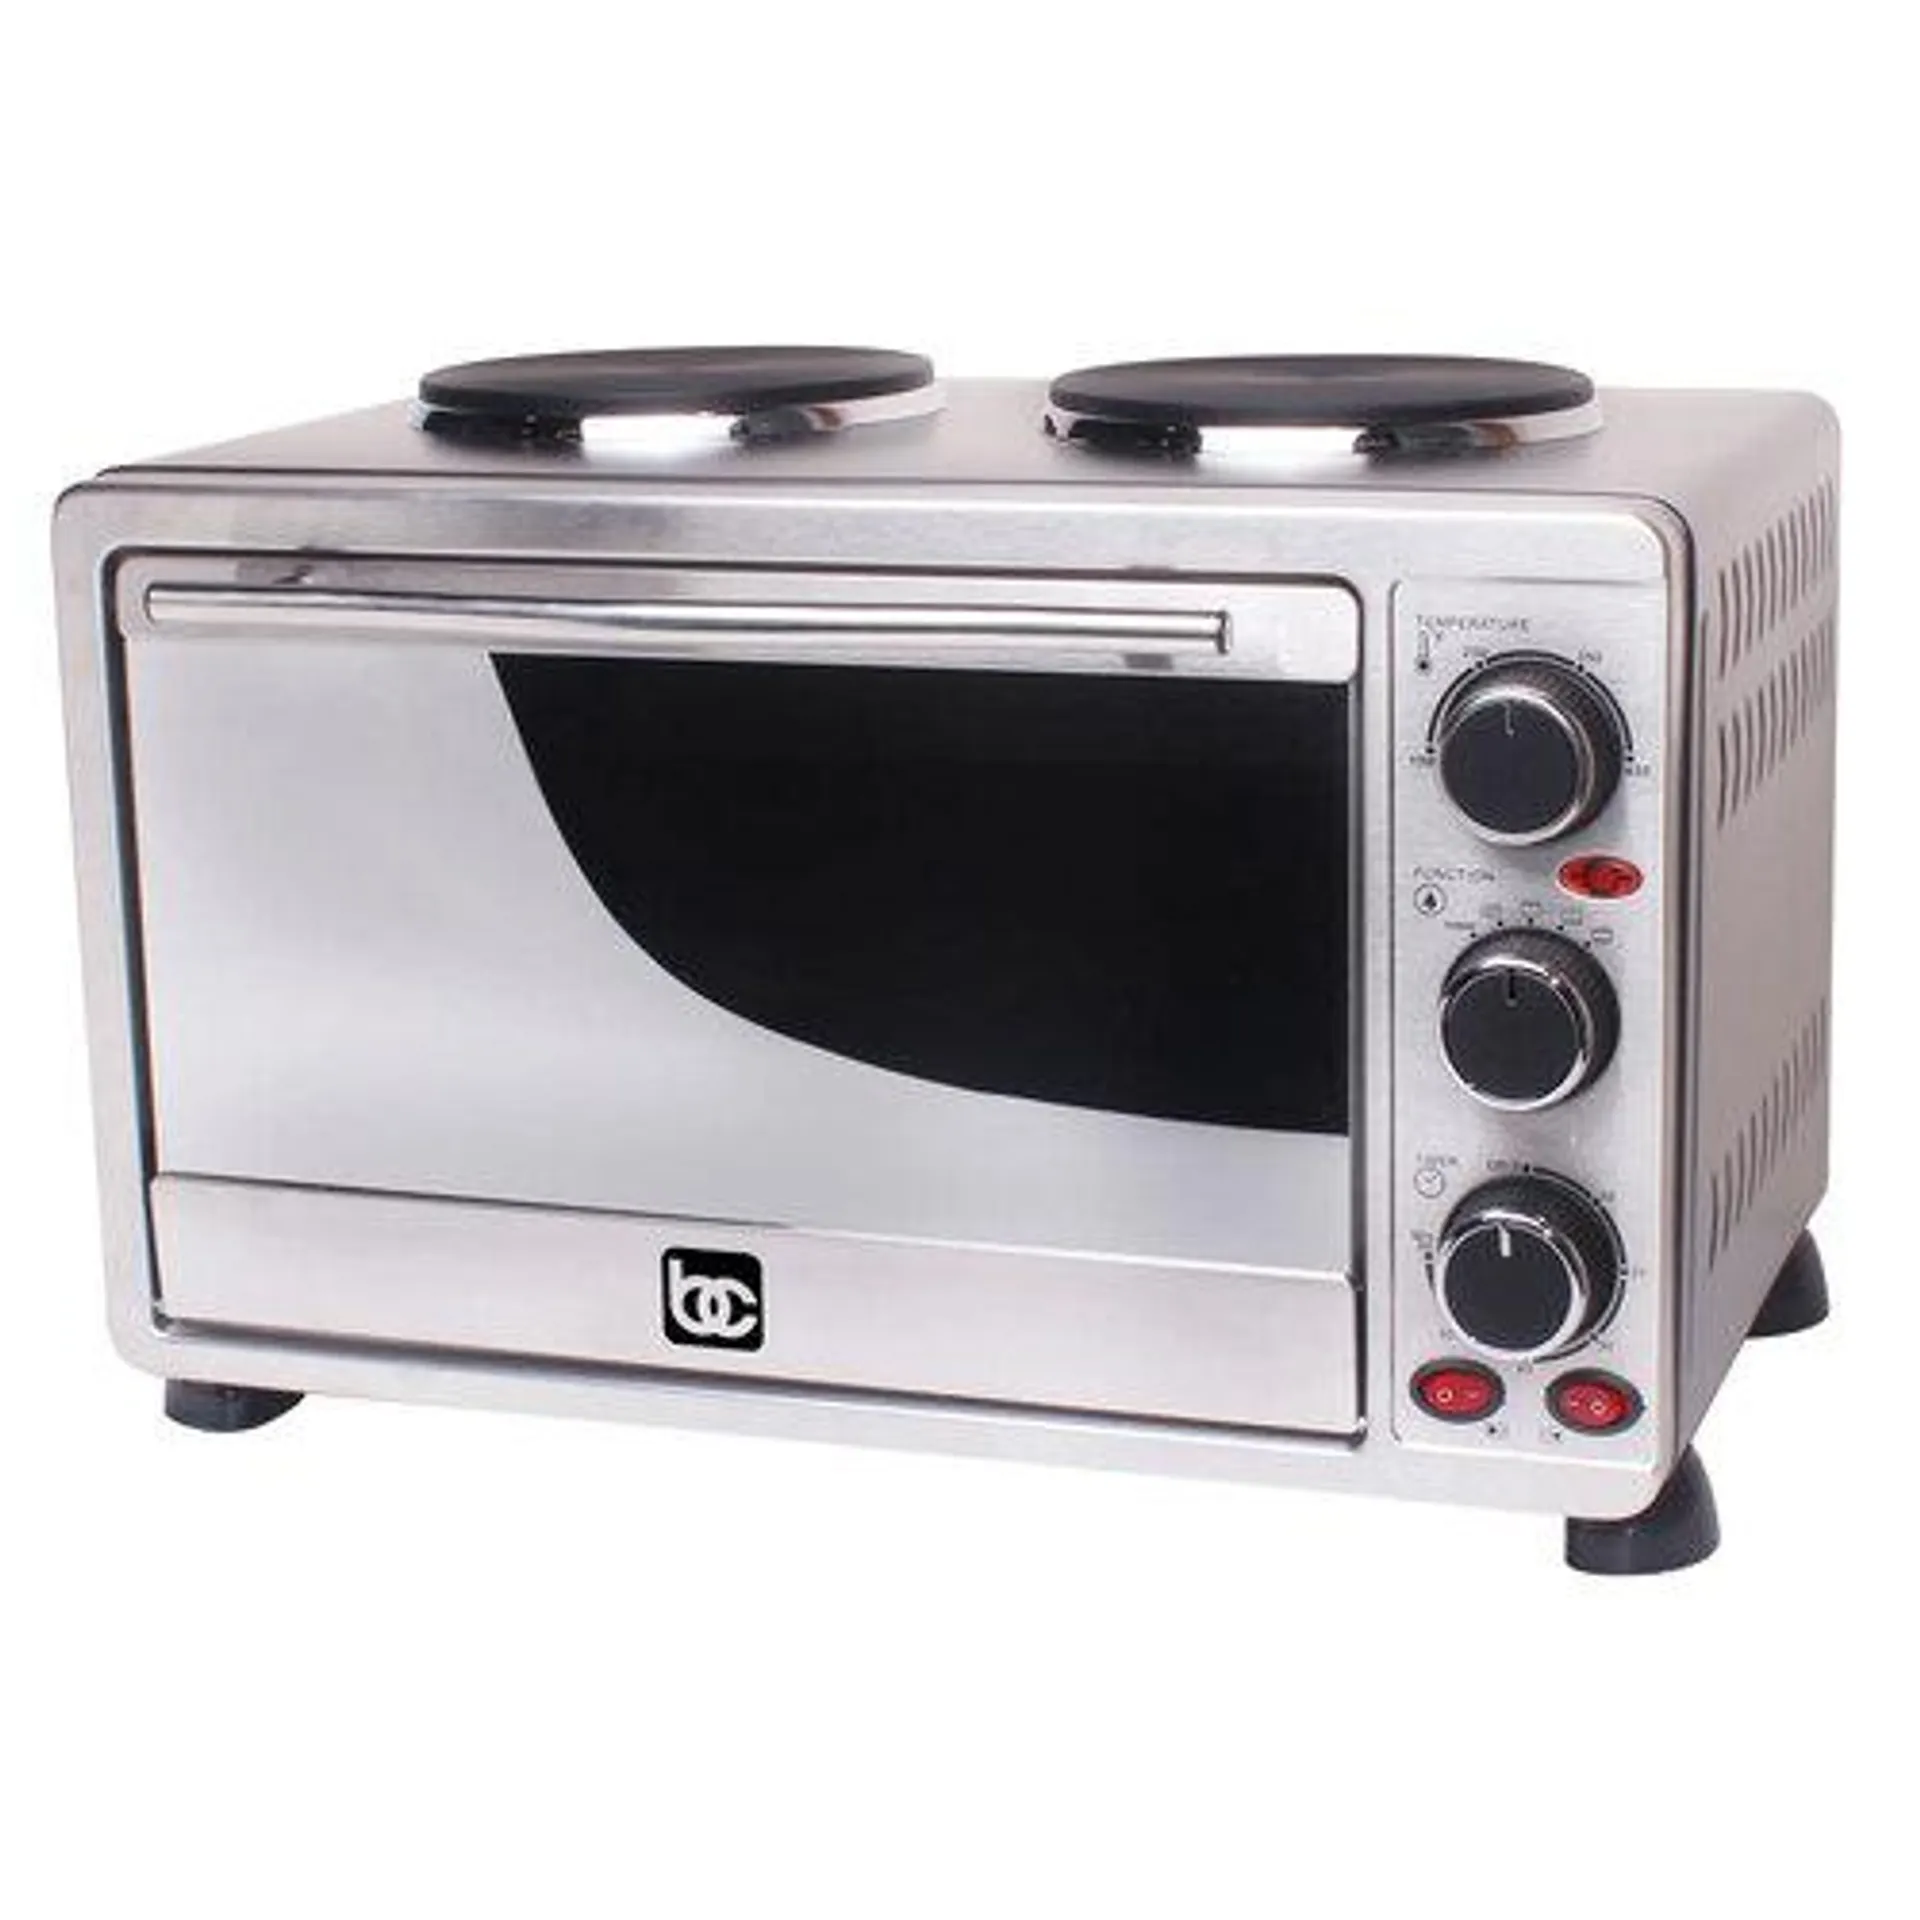 Toaster Oven with Double Burners